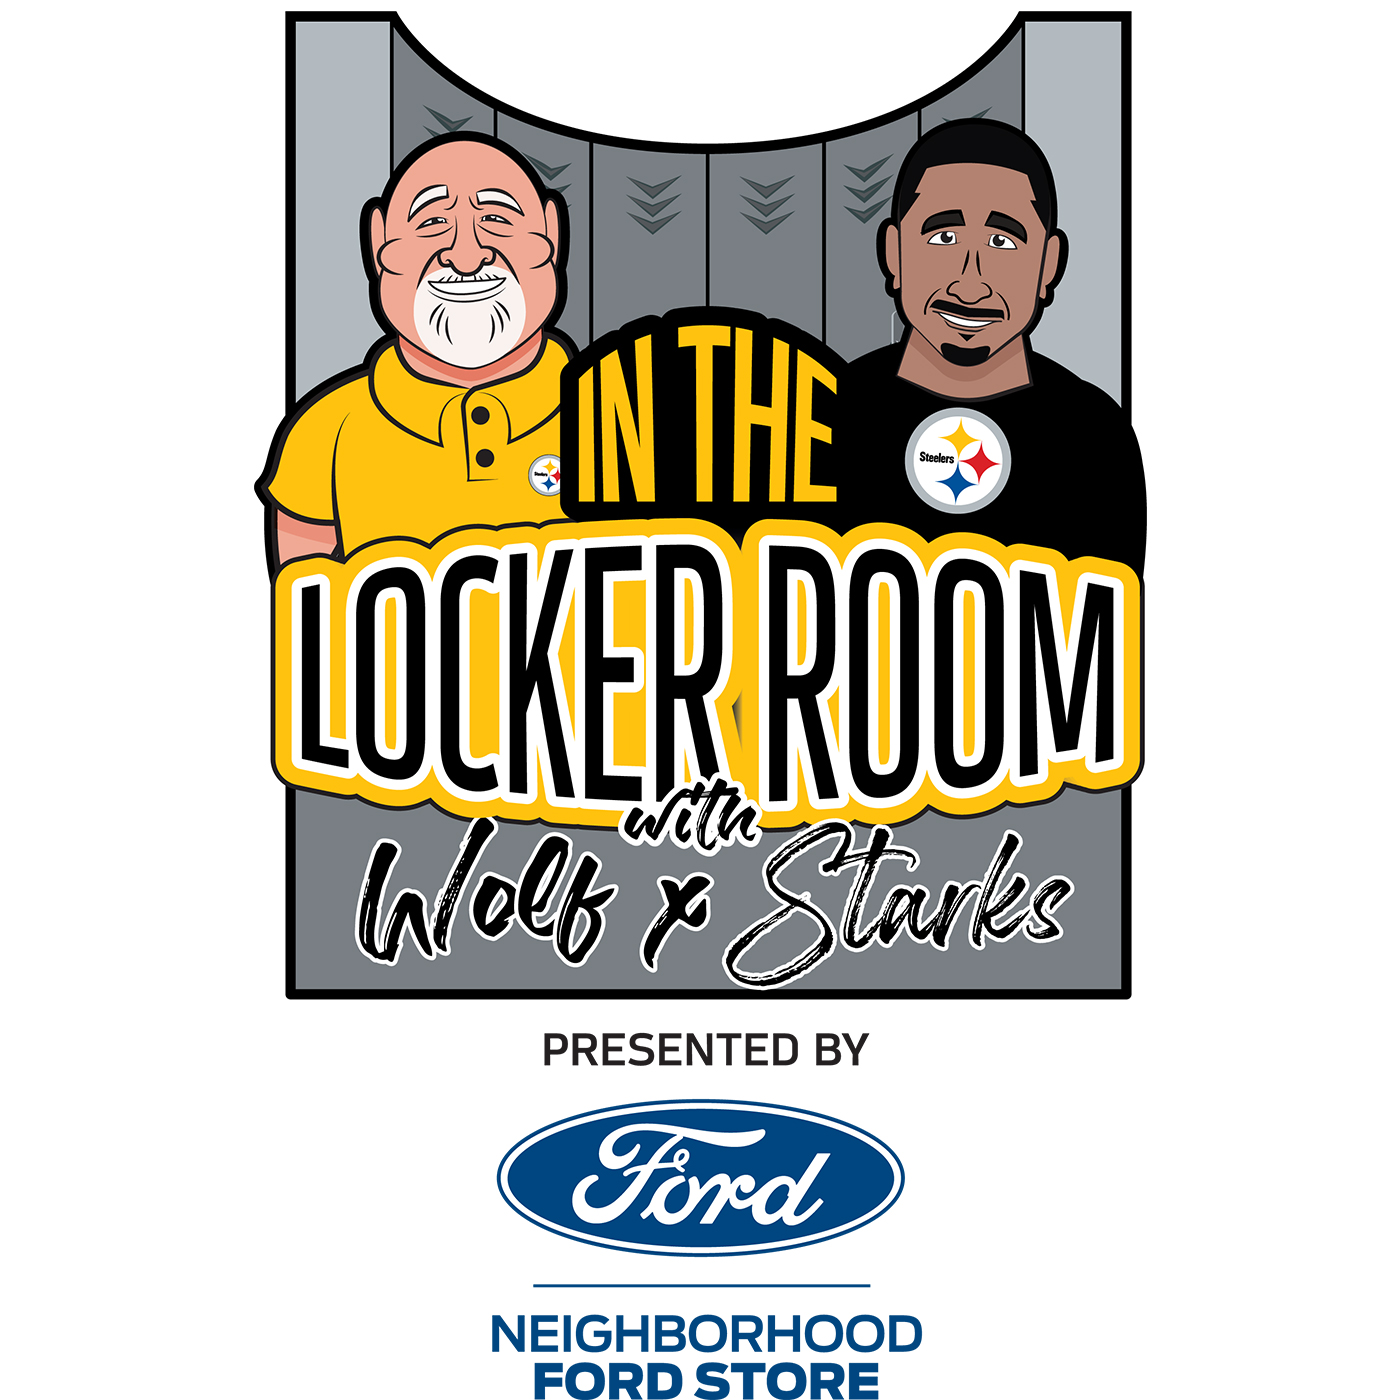 Segment 2: Tom Bradley and Gerry Dulac join the Locker Room